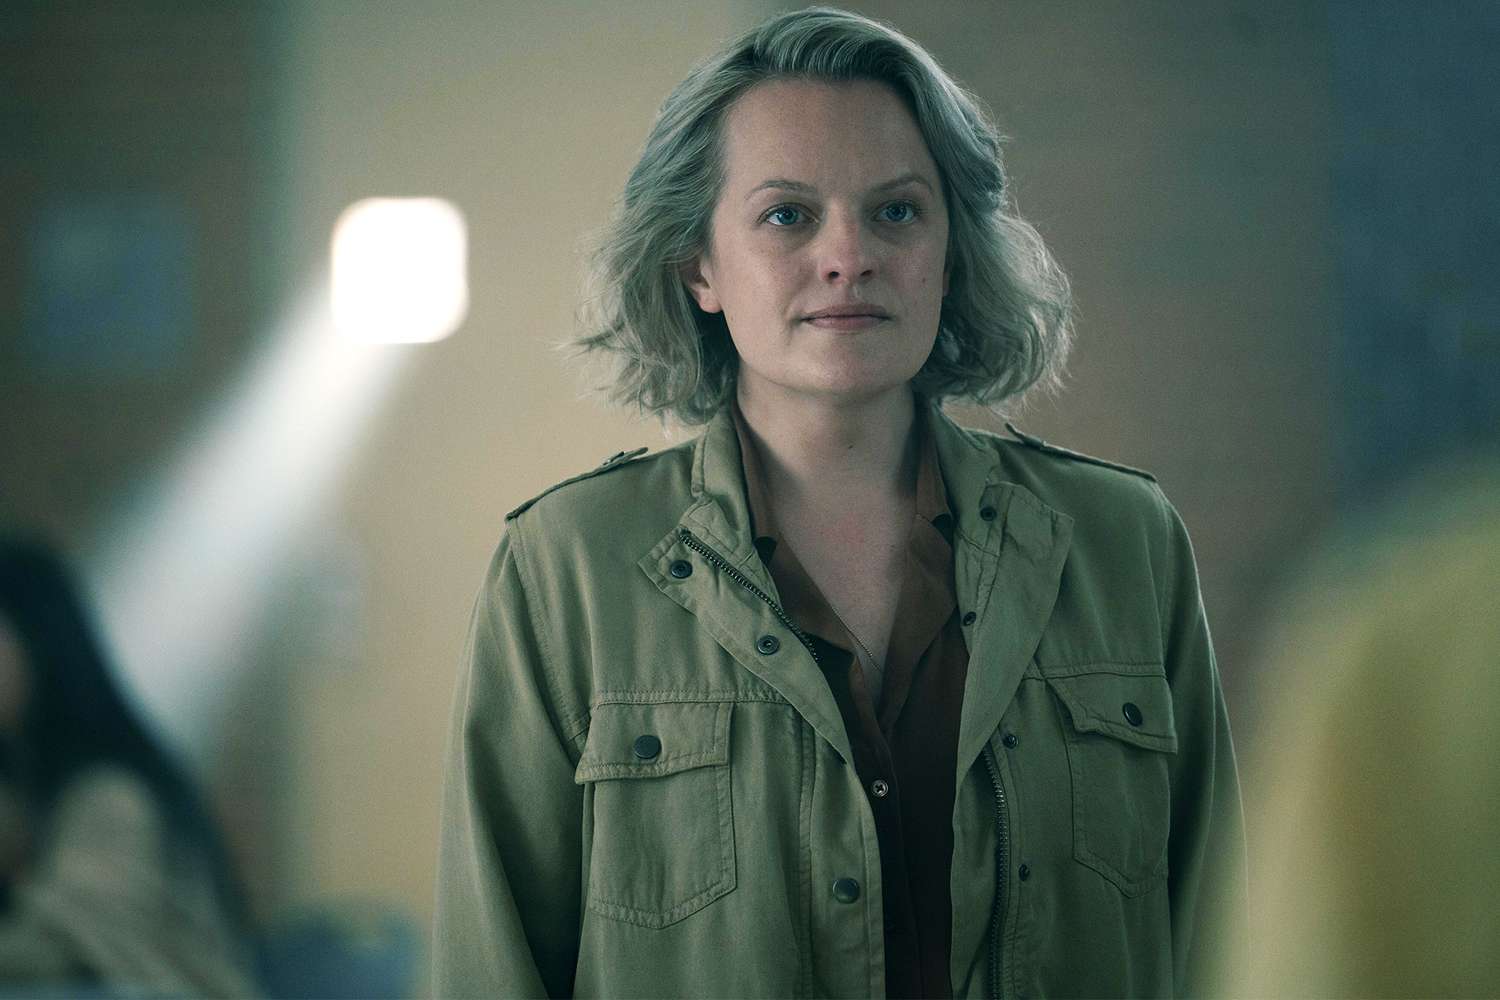 The Handmaid’s Tale -- “Motherland” - Episode 508 -- June considers a tempting but risky offer from a surprise visitor. Serena hits rock bottom and searches for allies. June (Elisabeth Moss), shown. (Photo by: Sophie Giraud/Hulu)